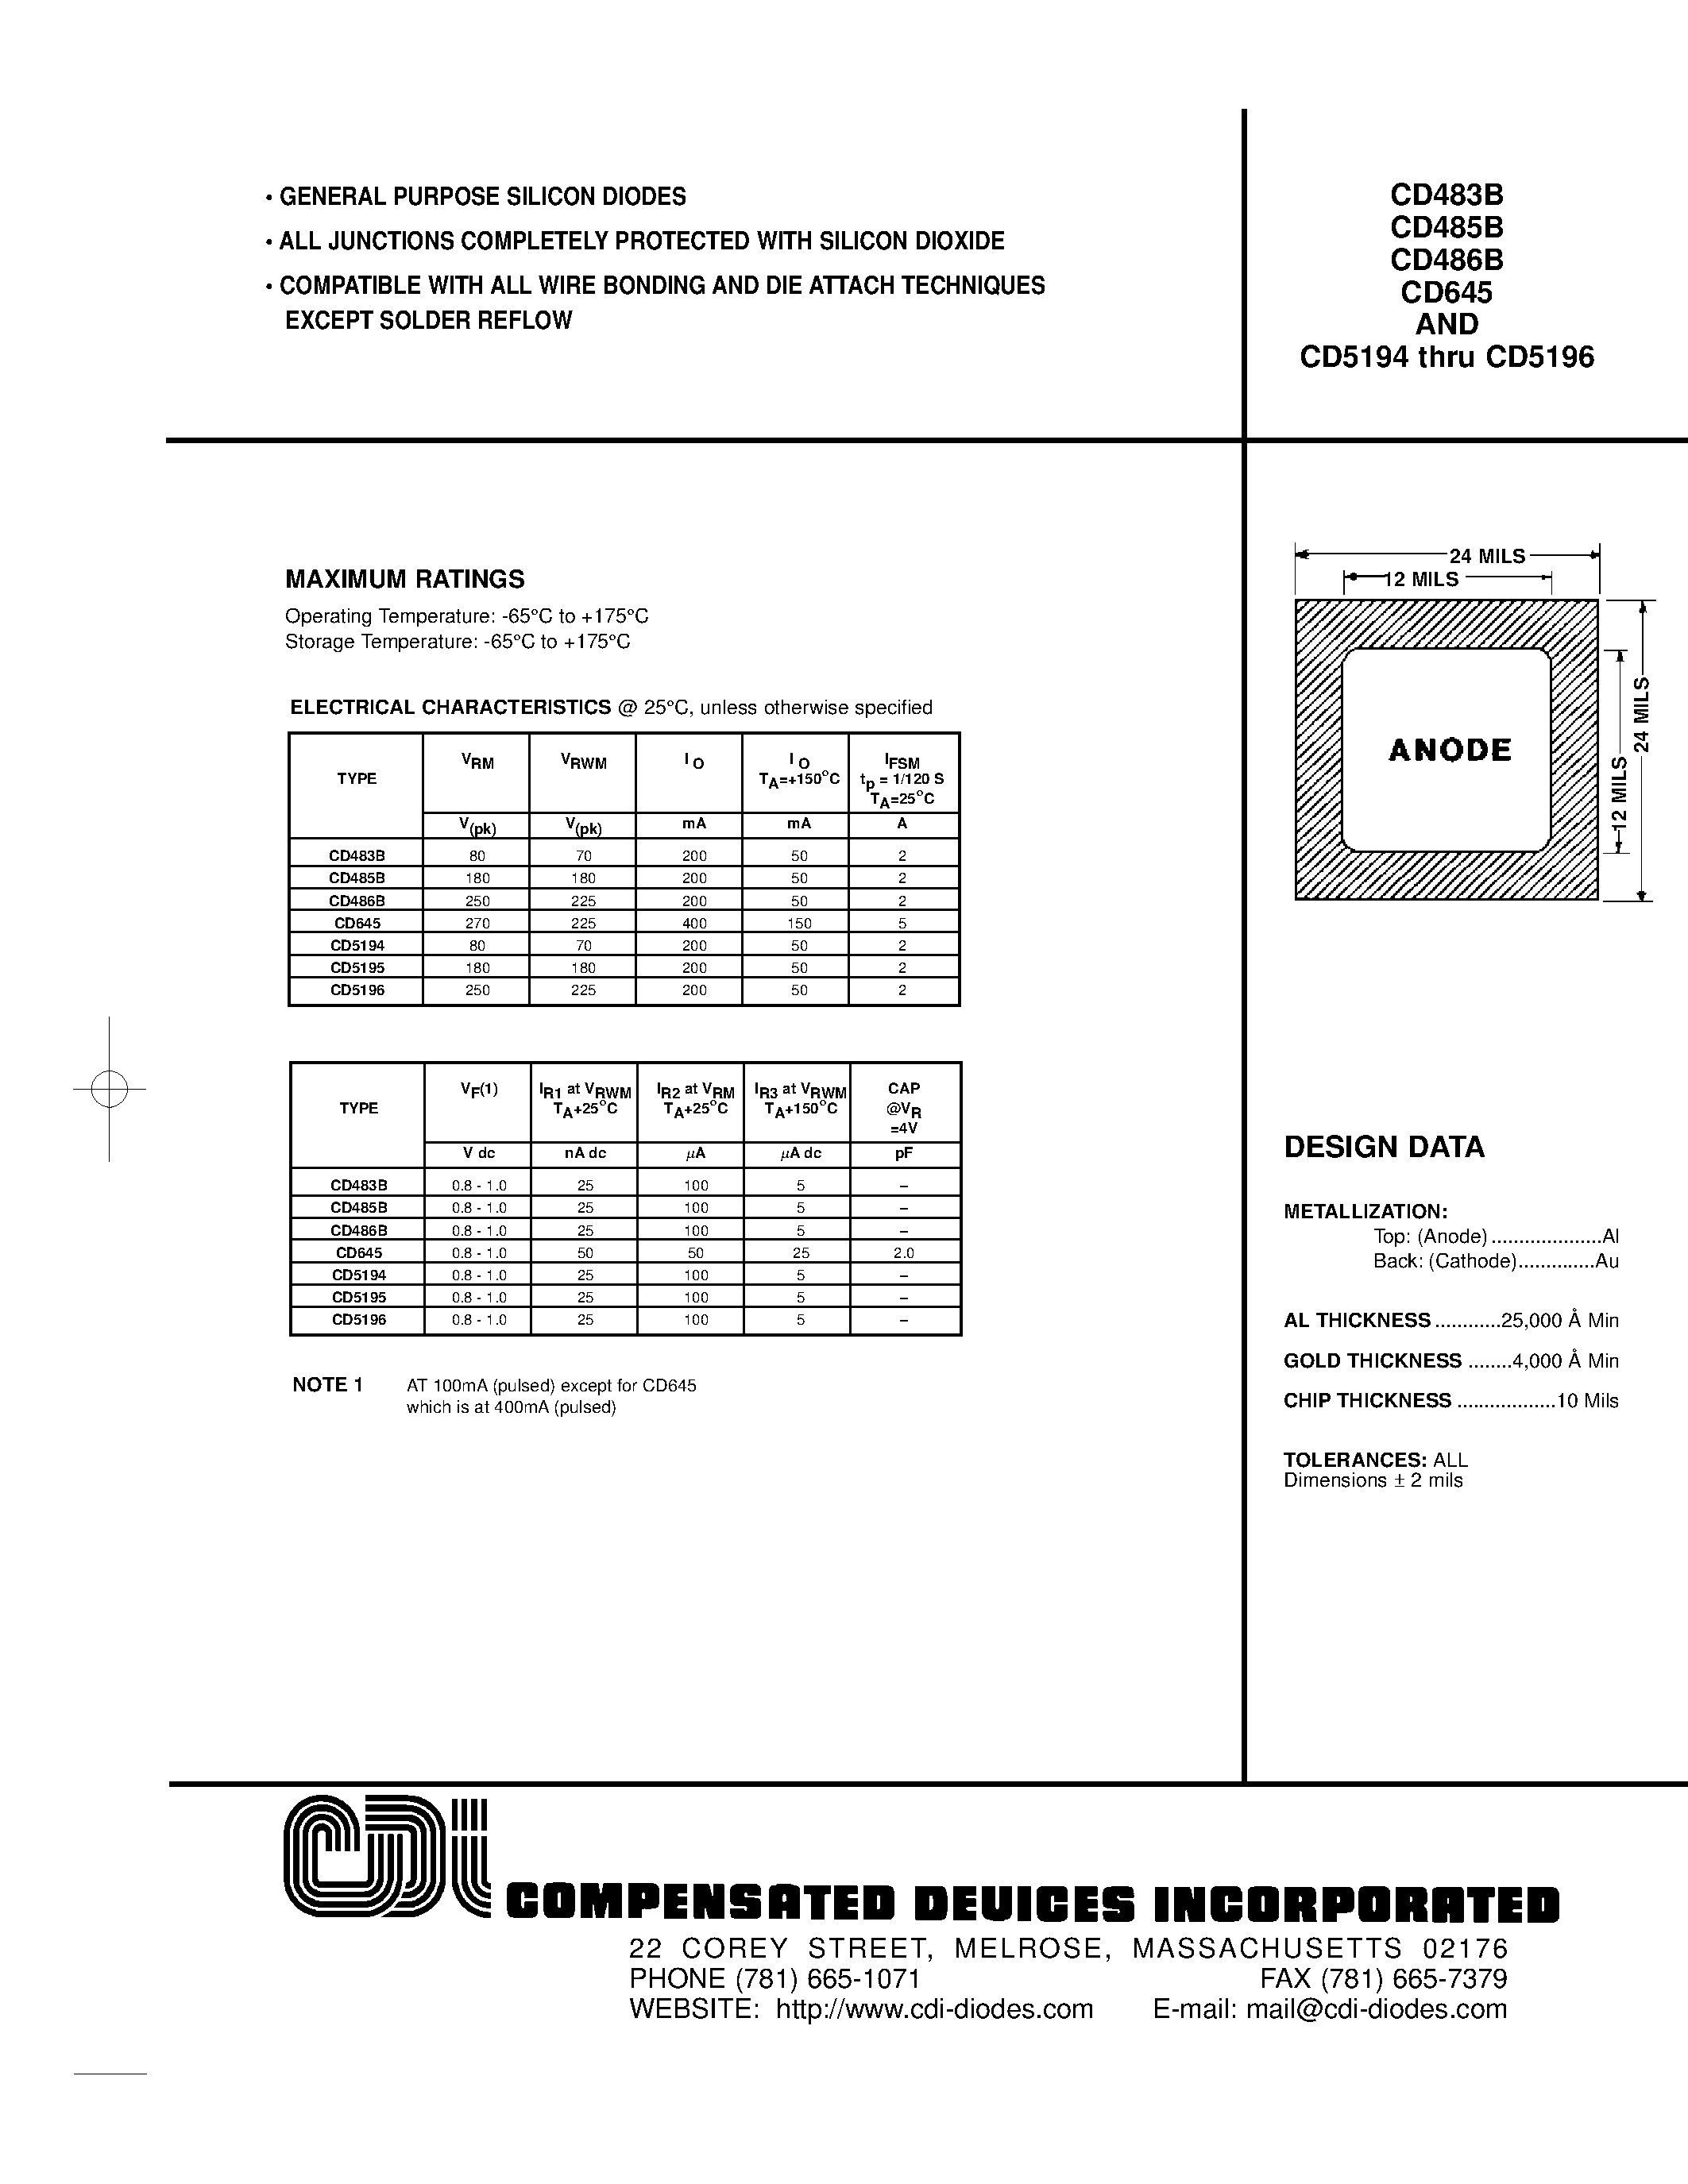 Datasheet CD486B - GENERAL PURPOSE SILICON DIODES page 1